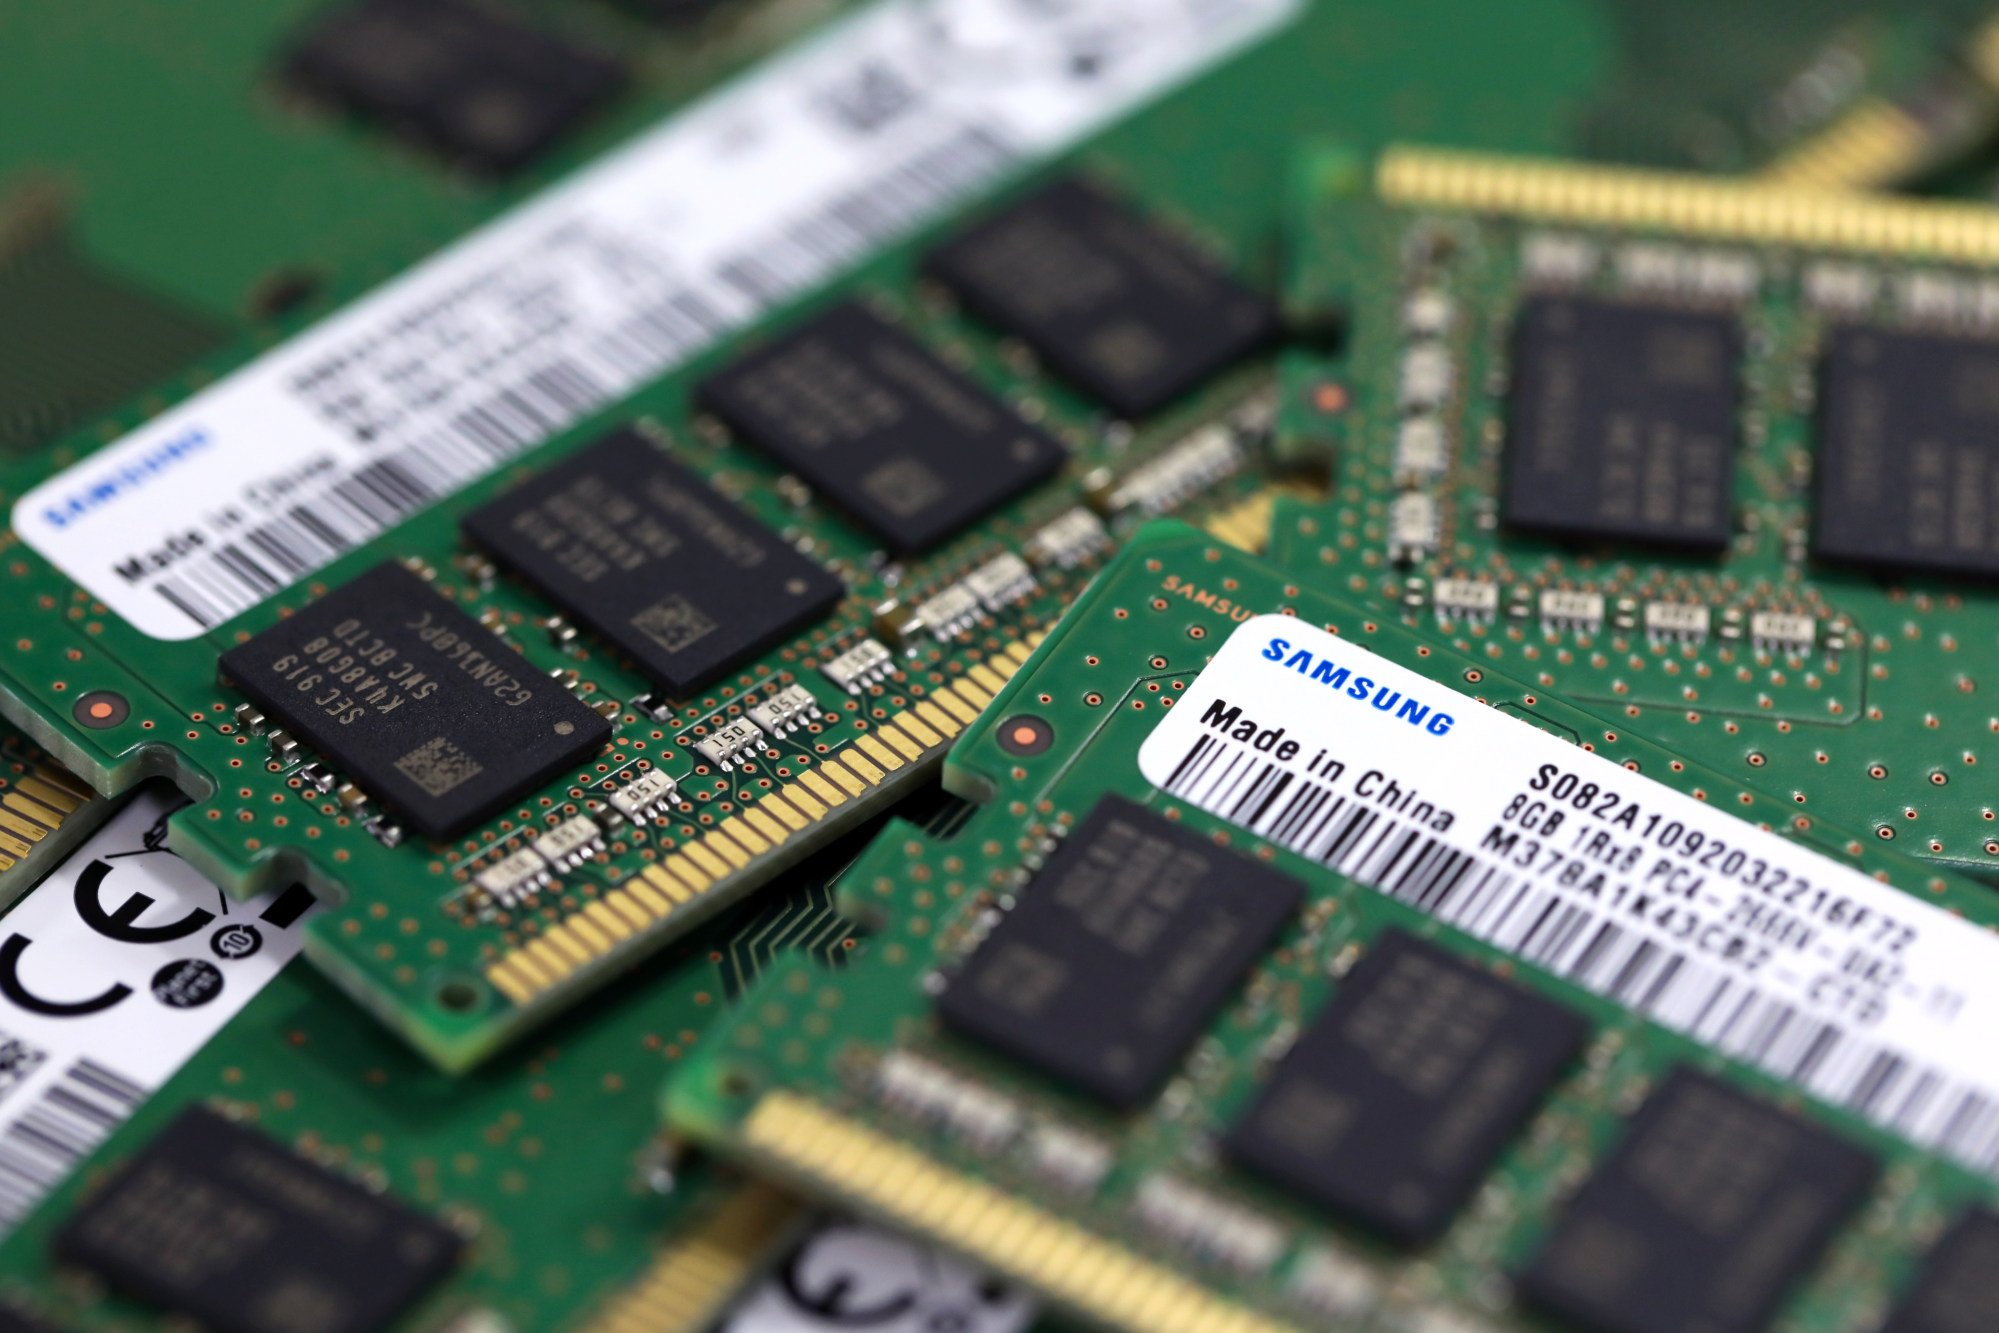 Memory chips manufactured by Samsung Electronics in China are seen in Seoul, South Korea, on July 9, 2019. Photo: Bloomberg